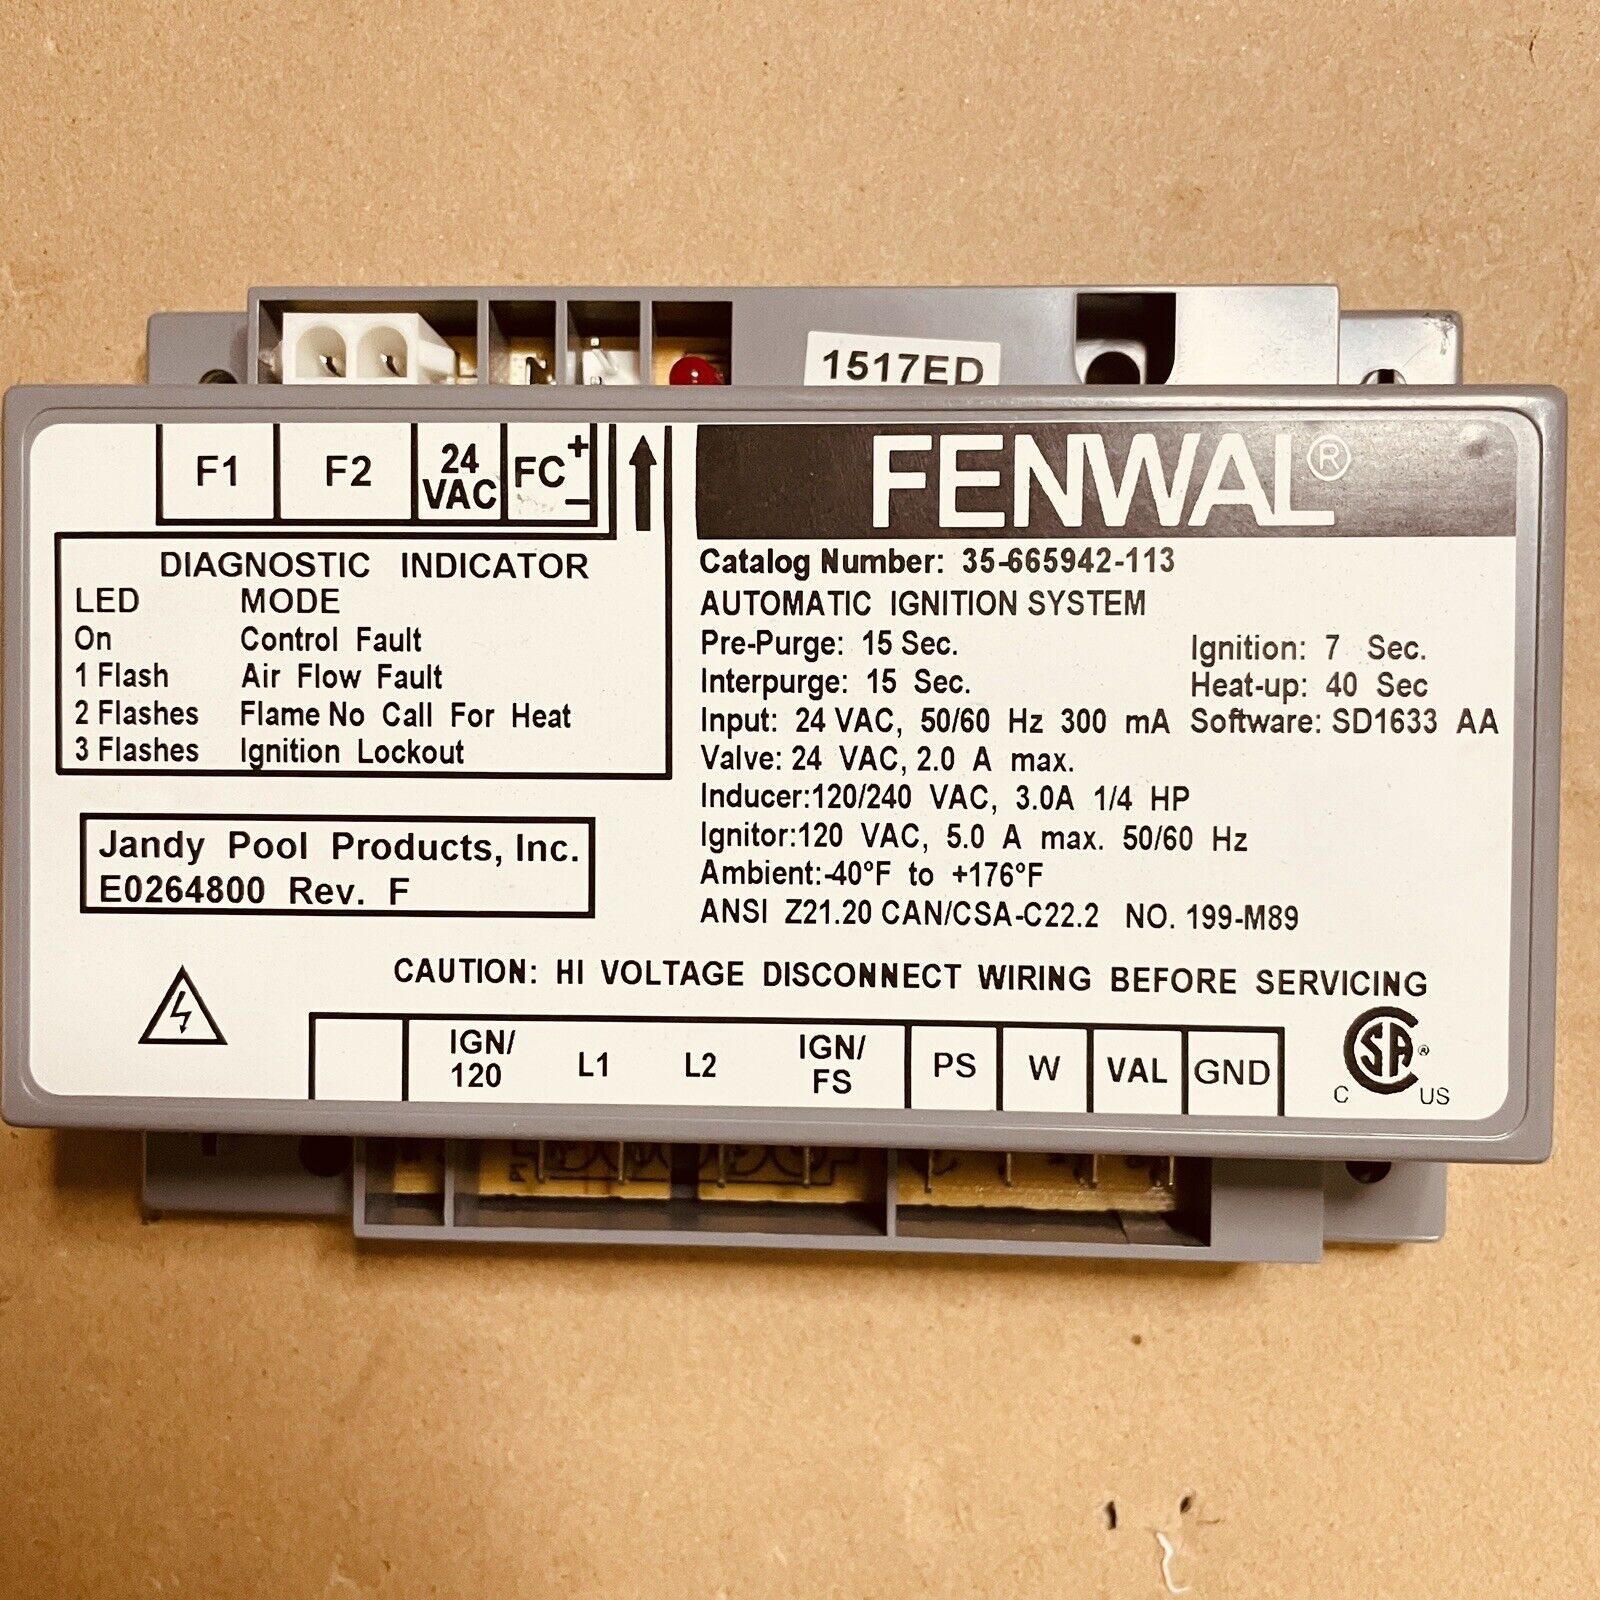 FENWAL 35-665942-113 Automatic Ignition Control System Module